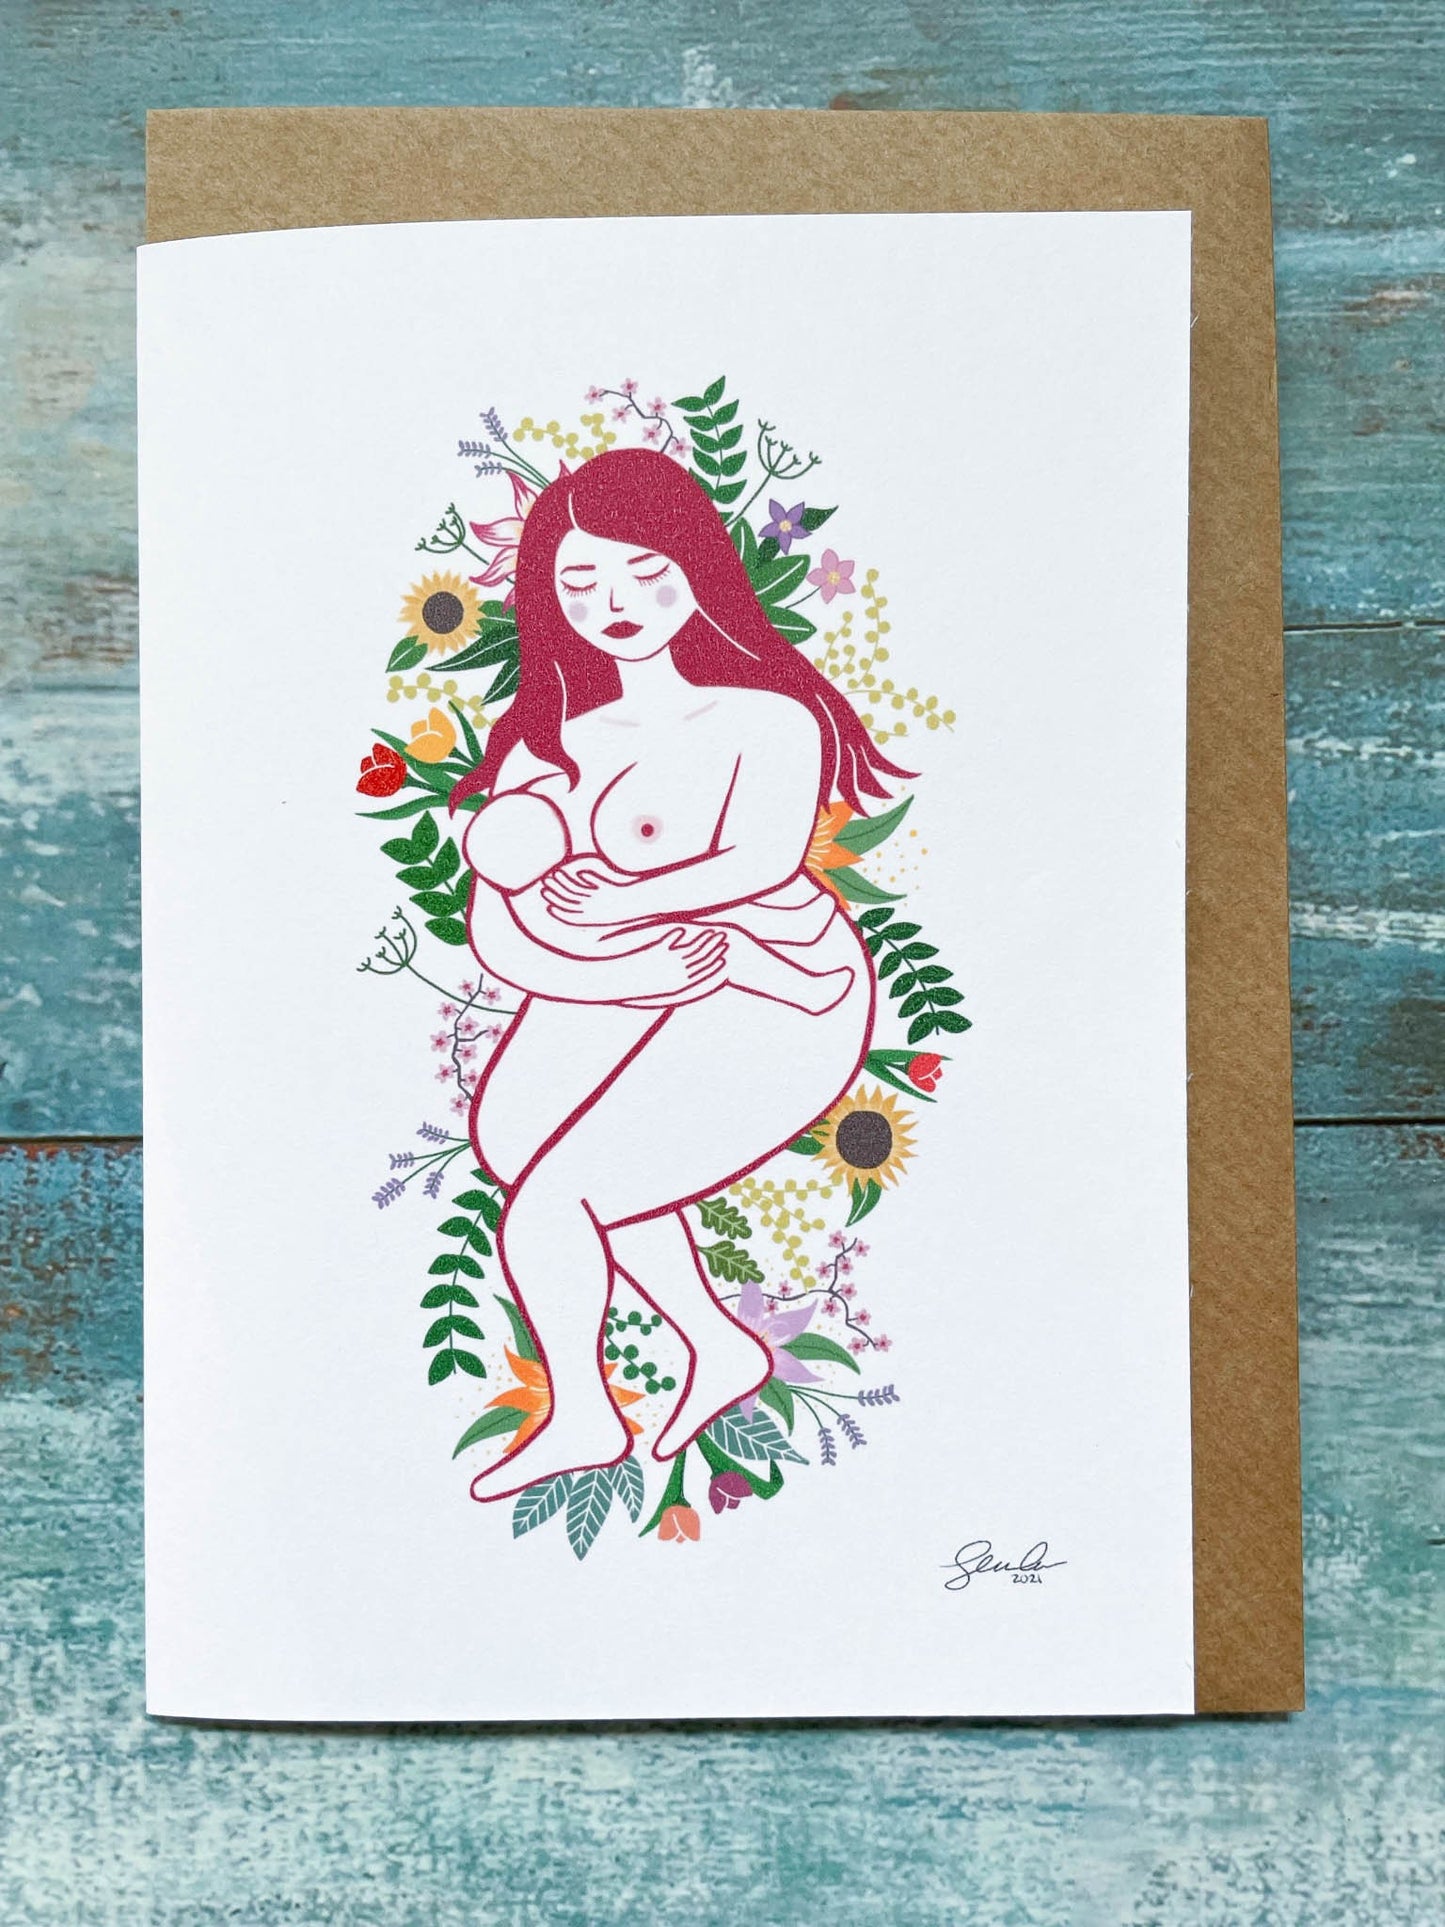 An A6 card of an illustration of a breastfeeding mother laying on a bed of flowers and leaves